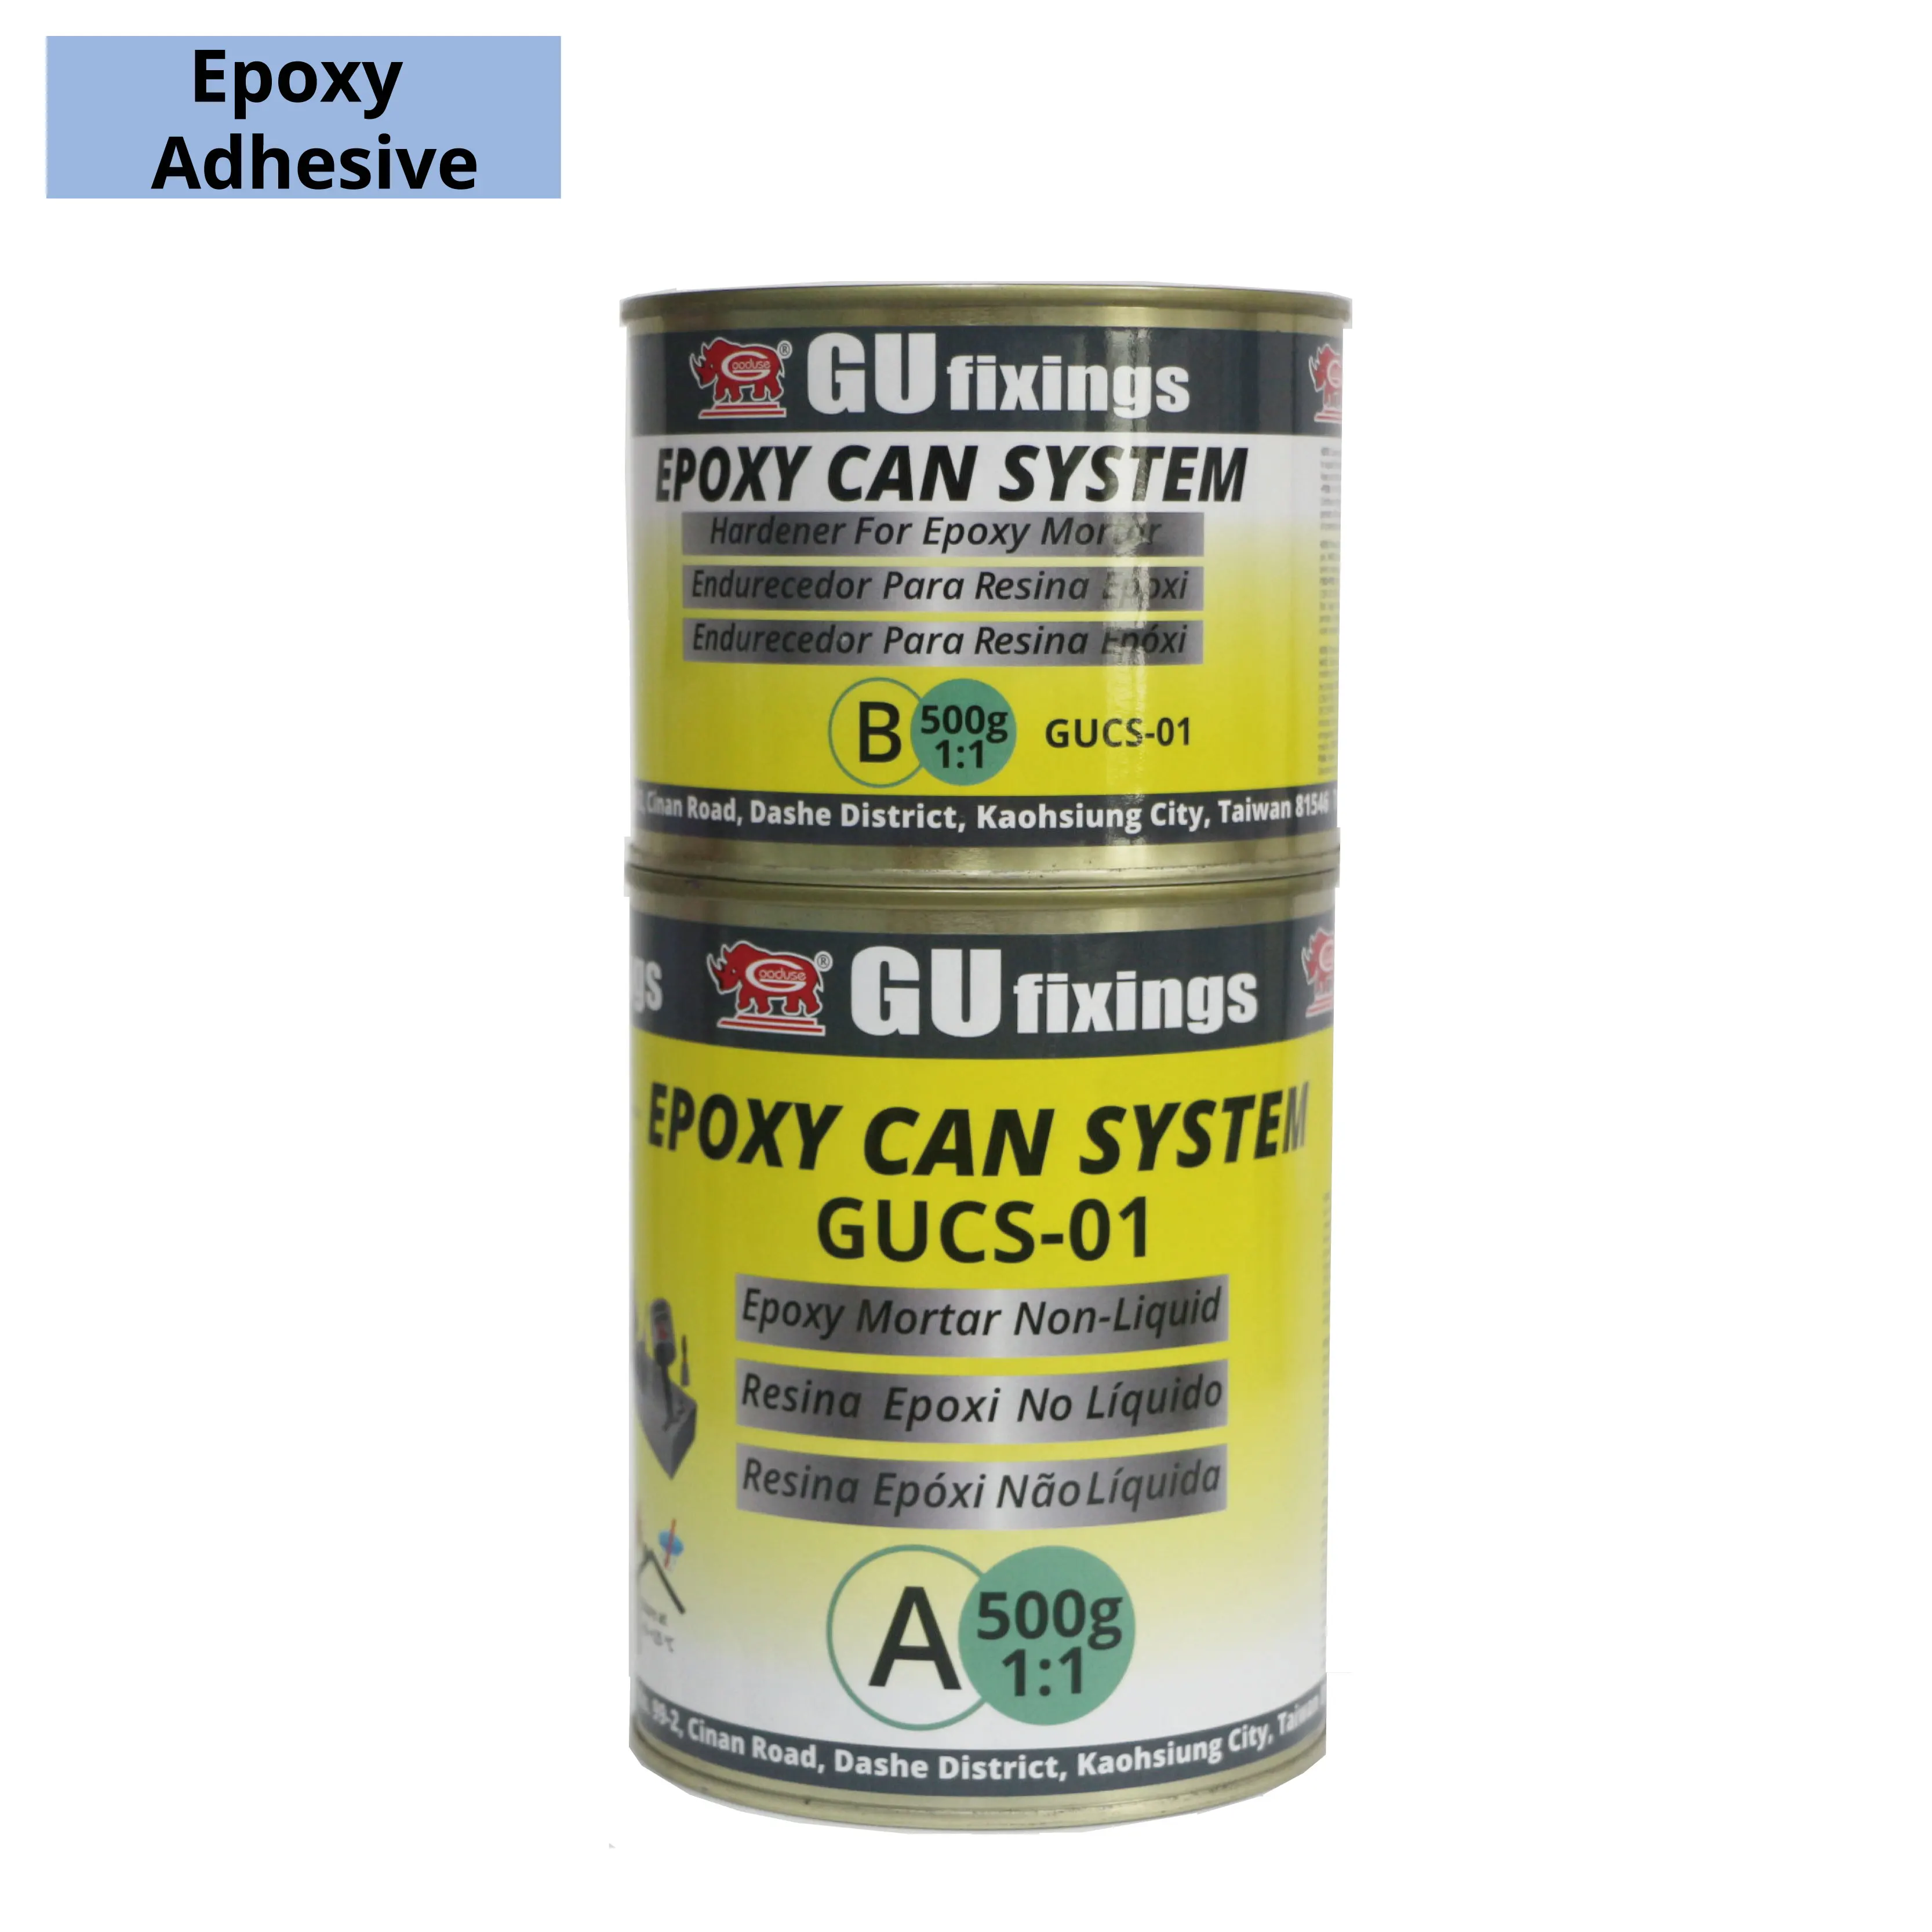 Epoxy Resin Putty Glue For Marble Granite And Stone Buy Ceramic Tile Crack Repair Bulk Ab No Shrink Grout Underwater Joint Fillers Concrete Epoxy Mortar Acid Alkali Resistant Marble Metal Epoxy Sealant Product